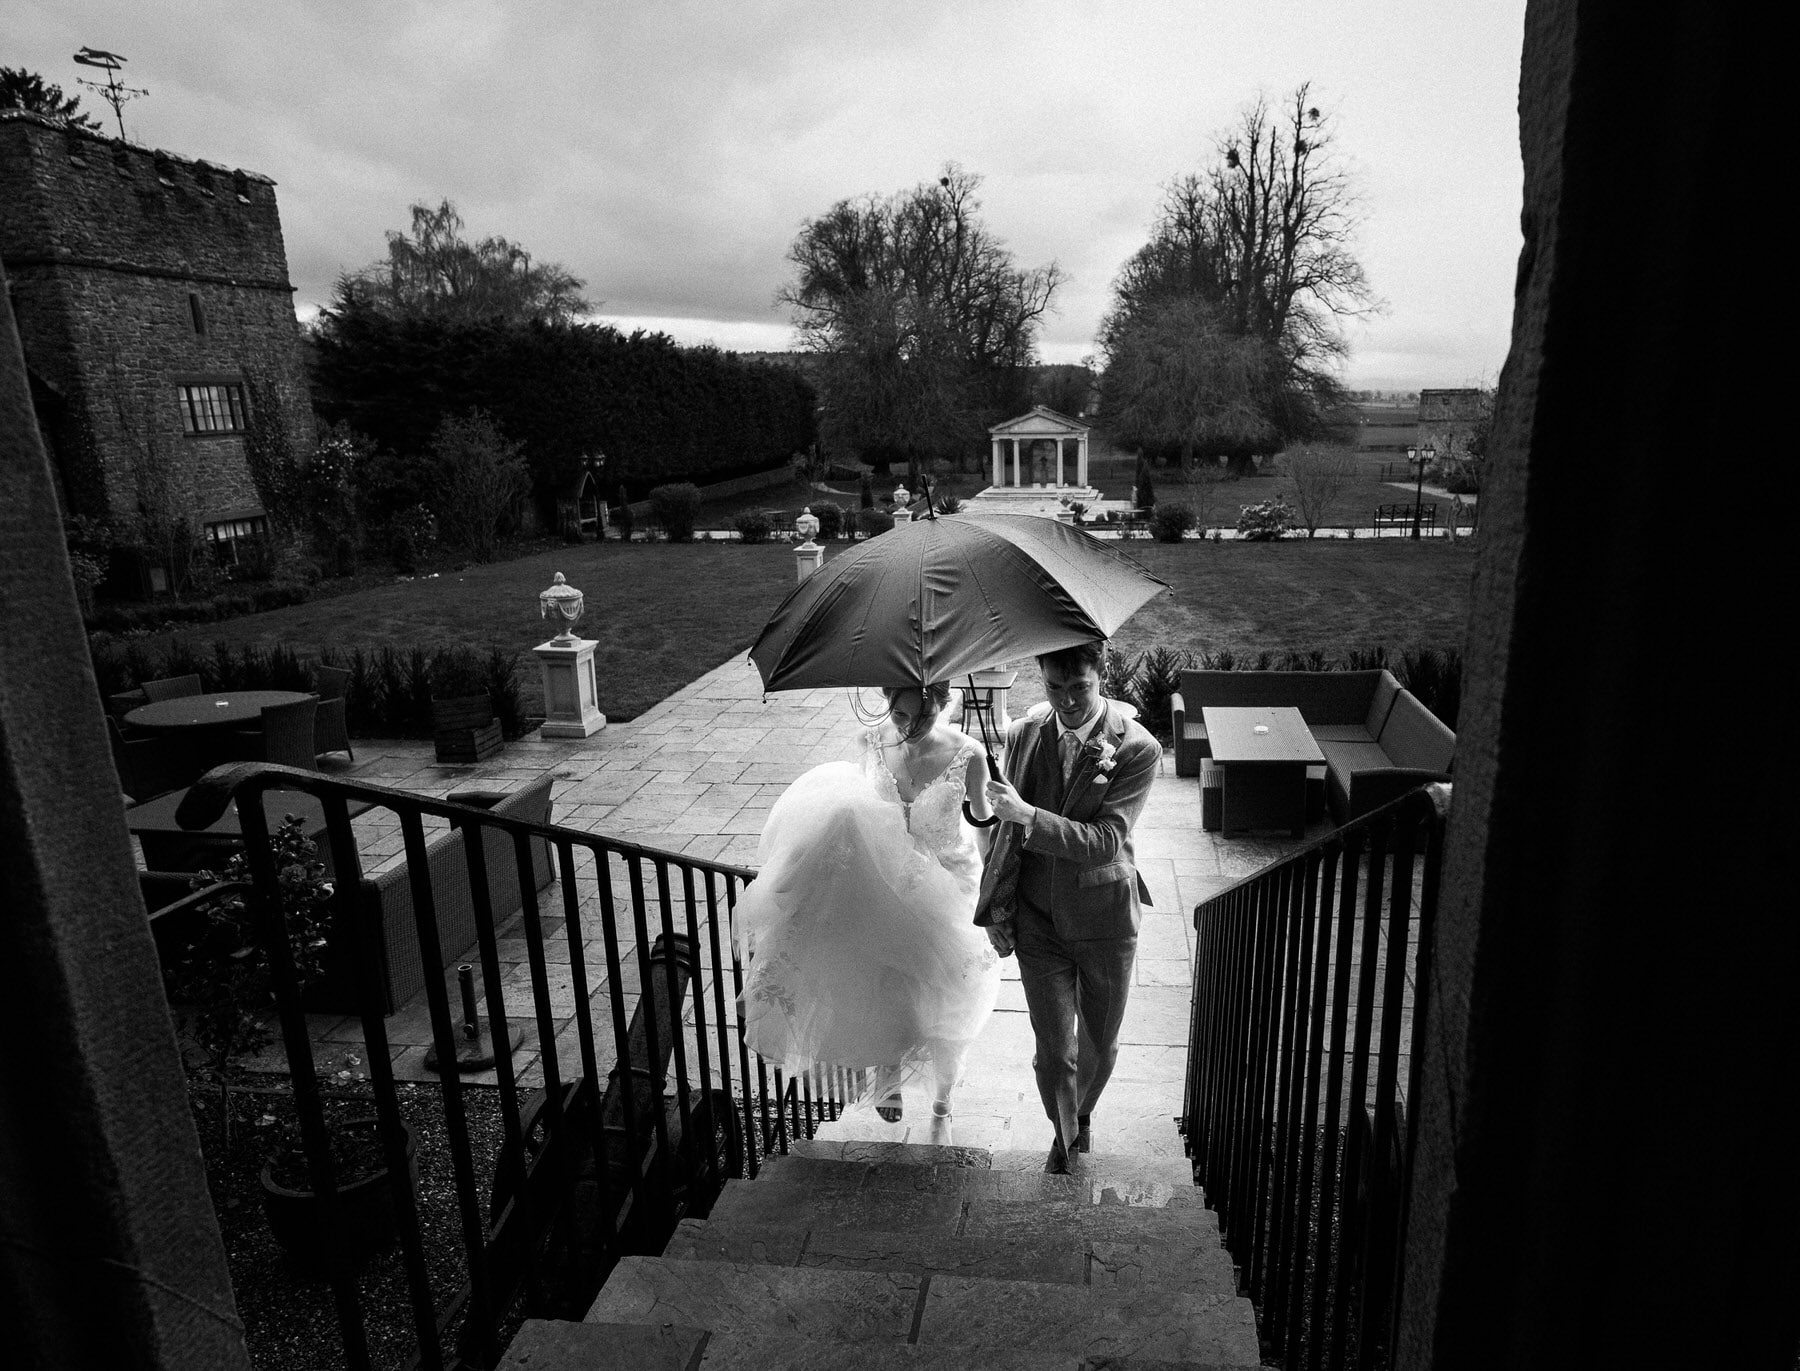 A bride and groom walking down the stairs at Rowton Castle Wedding, sheltered by an umbrella.